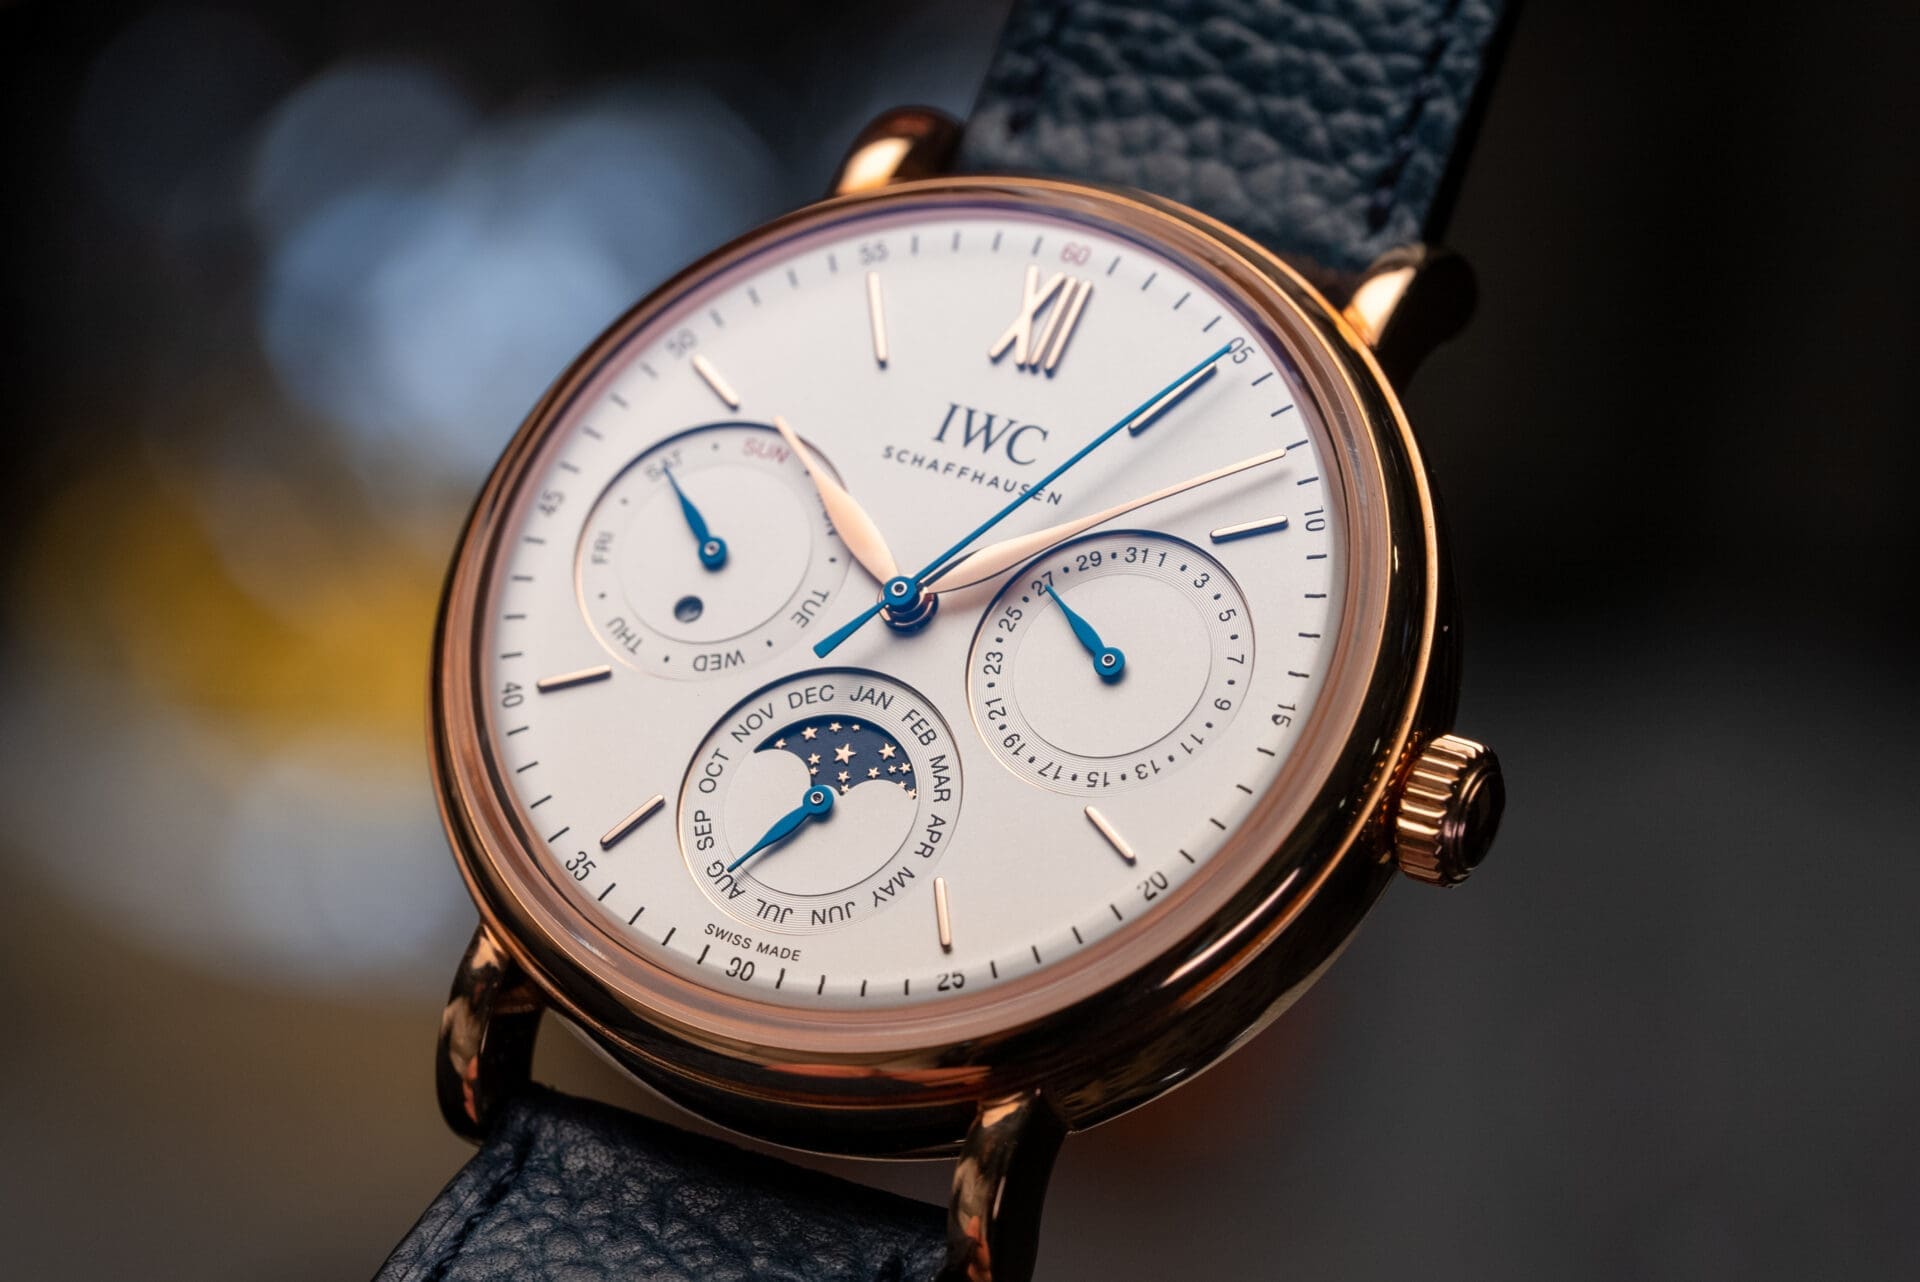 HANDS-ON: The new IWC Portofino collection delivers classical sophistication in spades